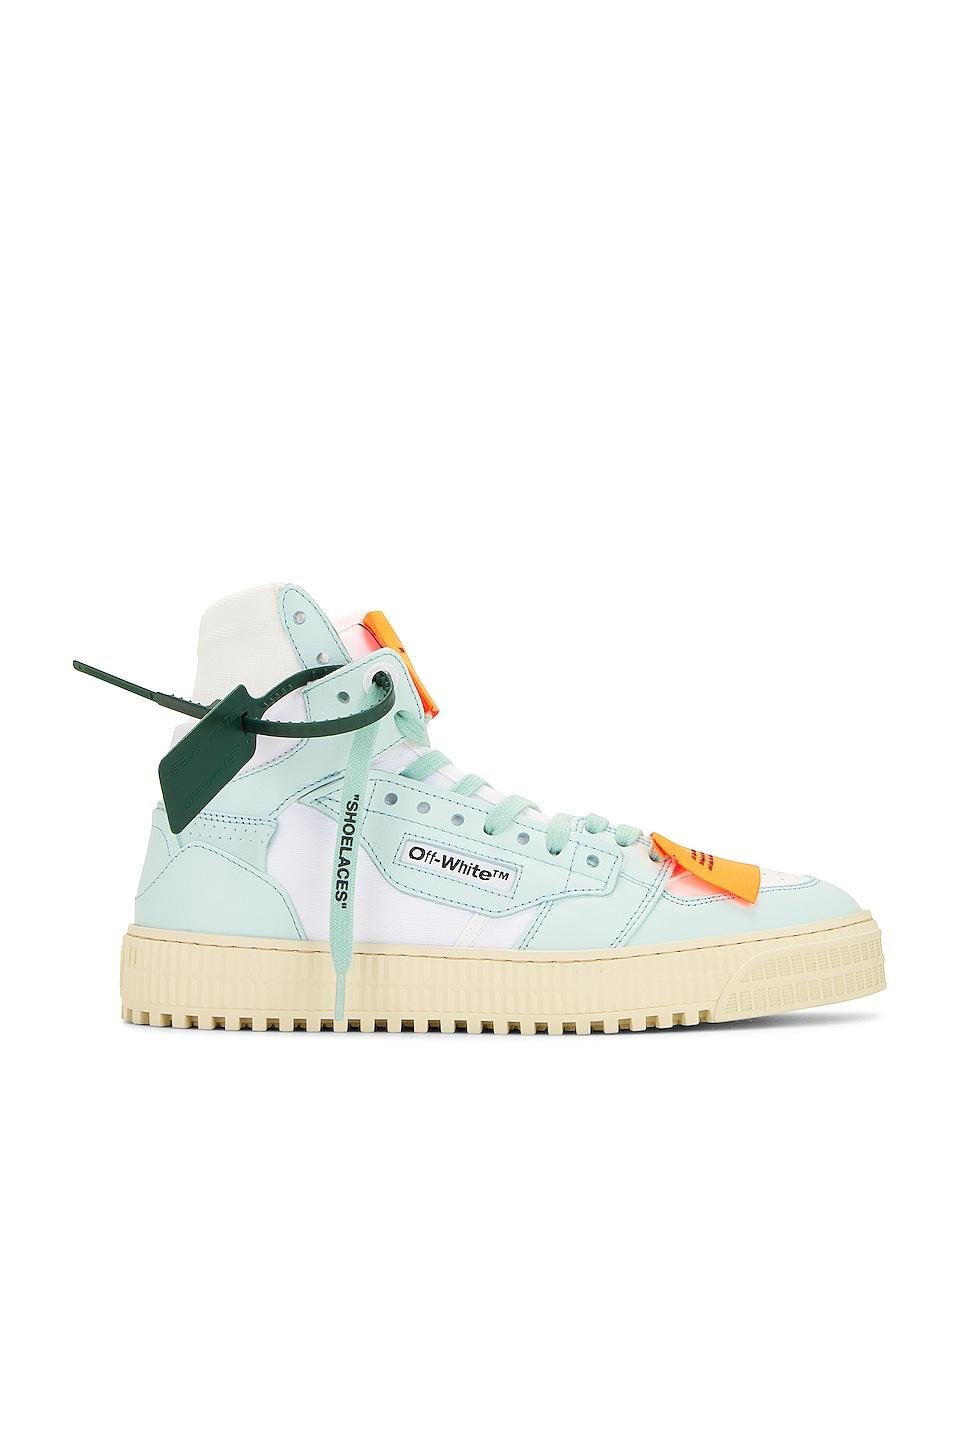 3.0 off court leather sneaker by OFF-WHITE